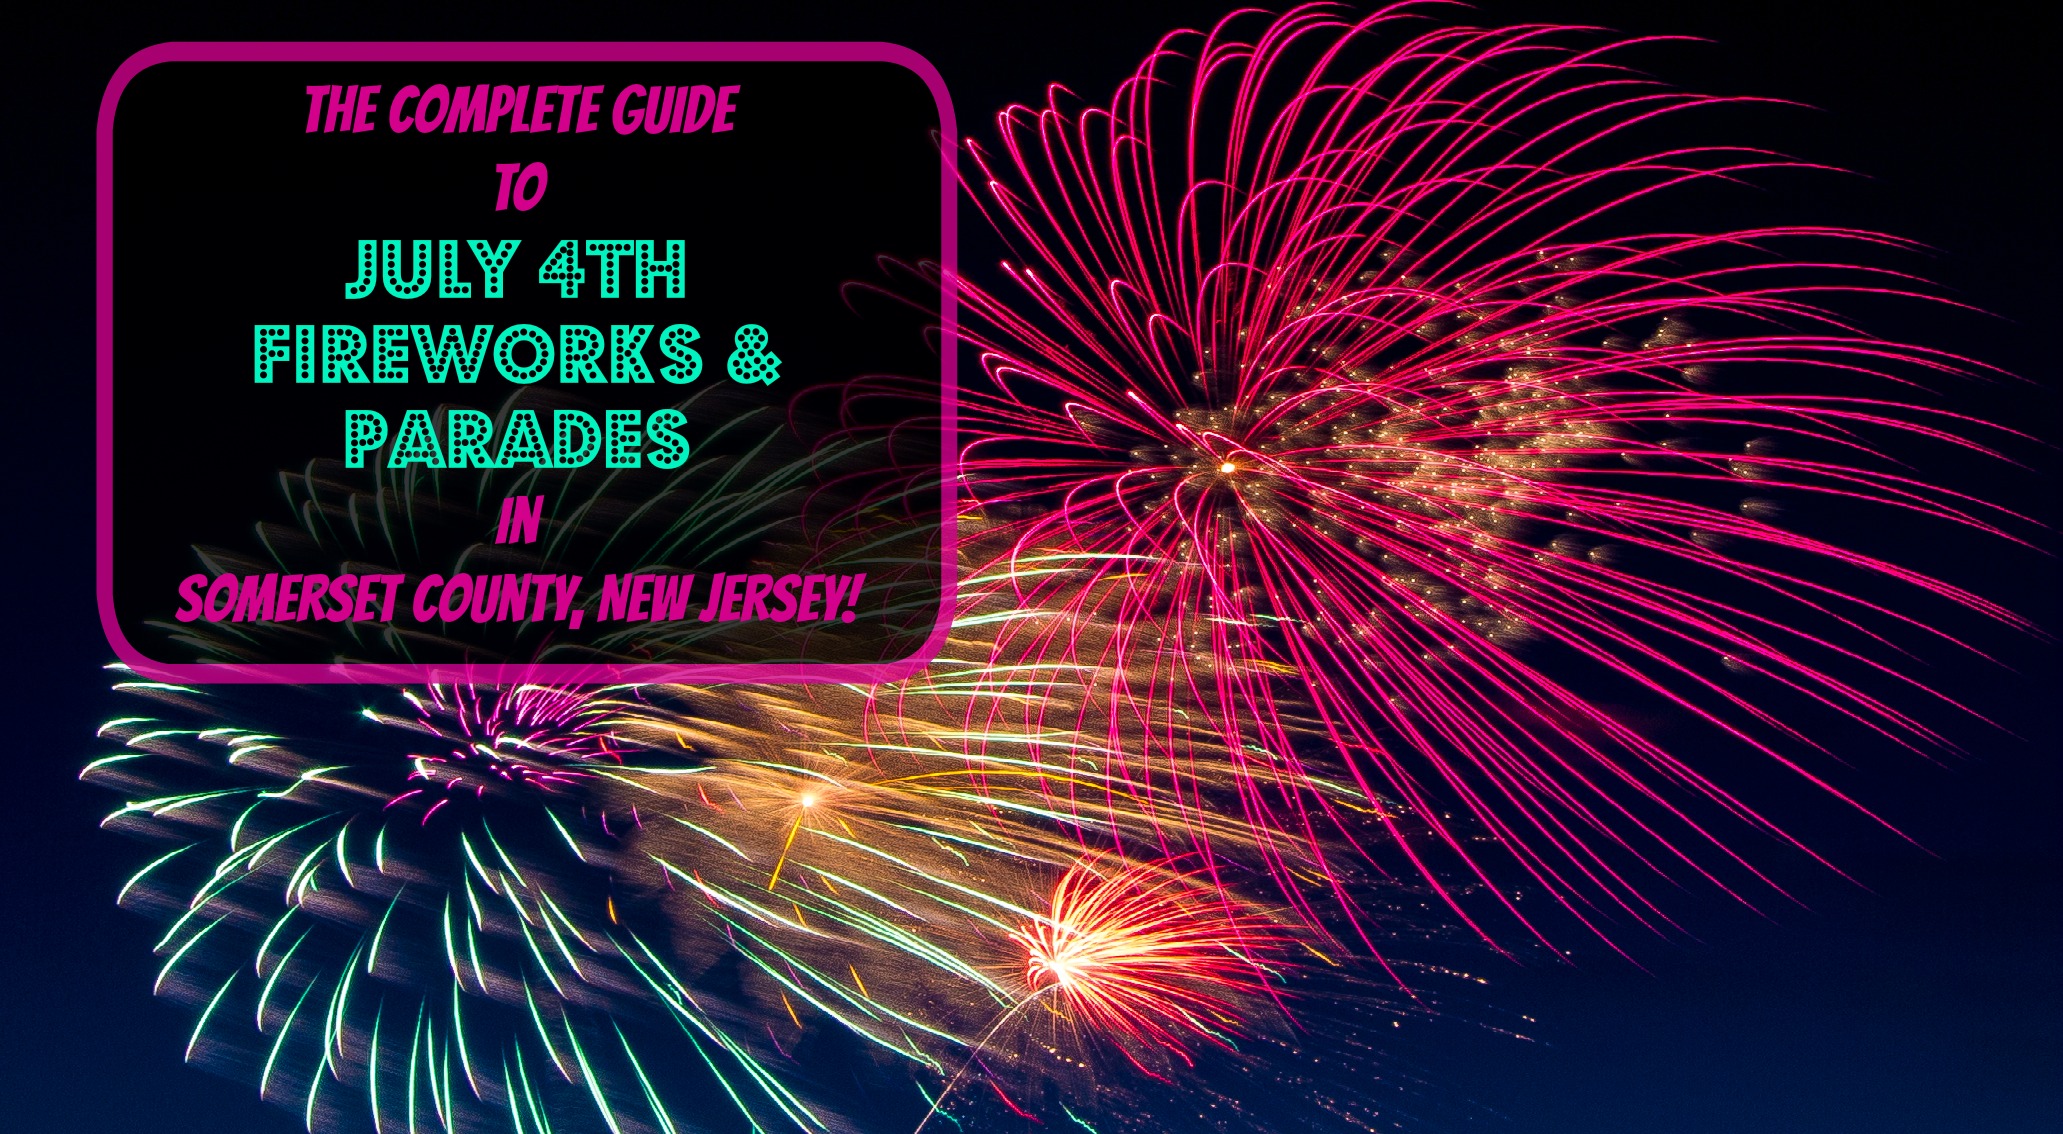 The Complete Guide to July 4th Fireworks in Somerset County NJ 2018